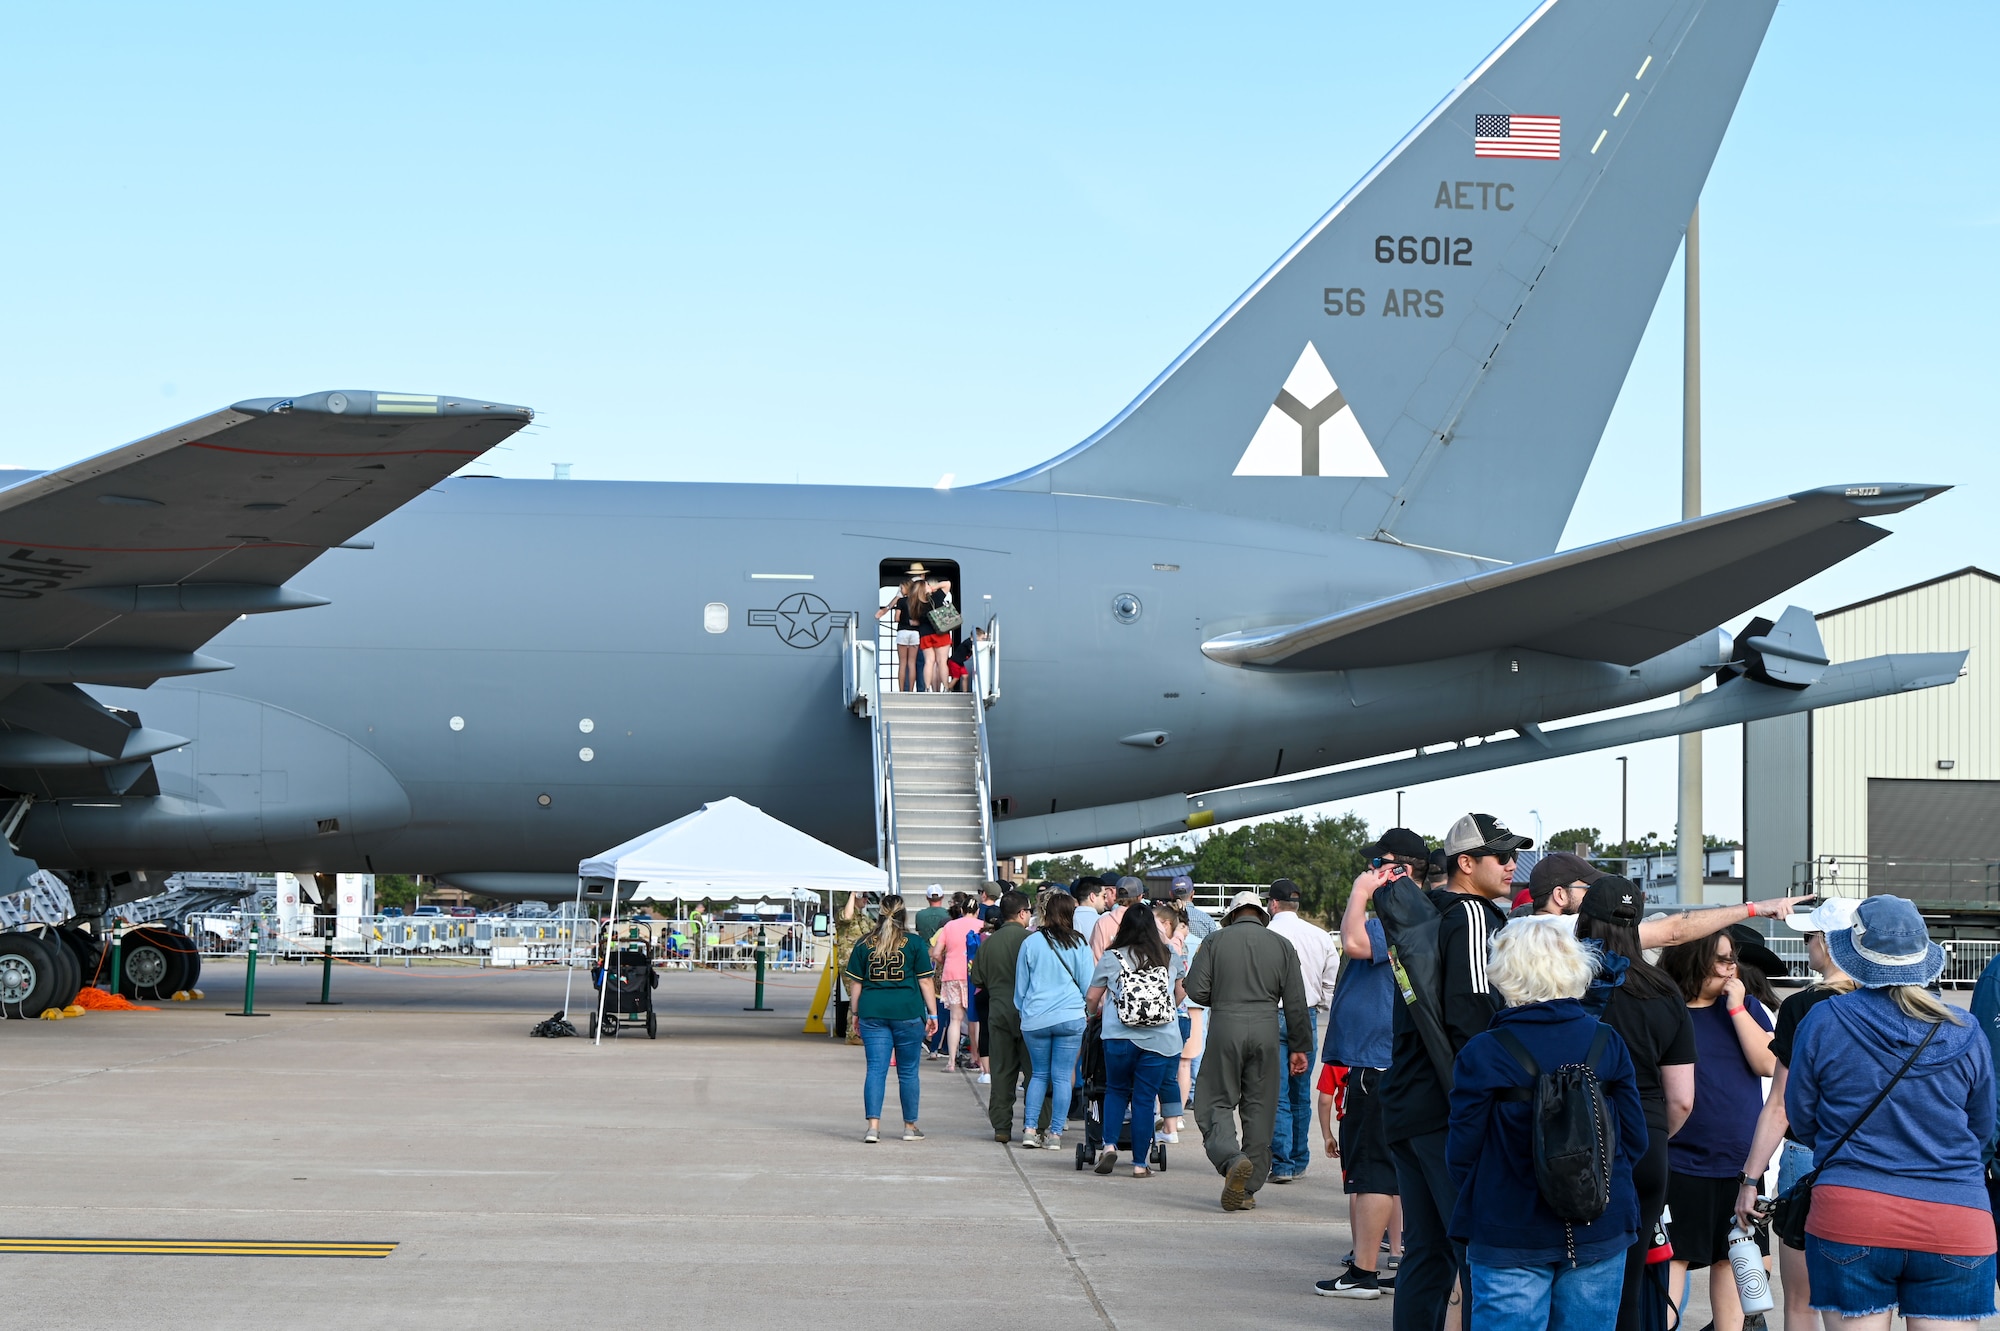 A KC-46 Pegasus sits on the flightline at Altus Air Force Base, Oklahoma, Oct. 1, 2022, during the Red River Thunder airshow. KC-46 pilots and boom operators gave a tour of the aircraft to airshow attendees. (U.S. Air Force photo by Senior Airman Kayla Christenson)